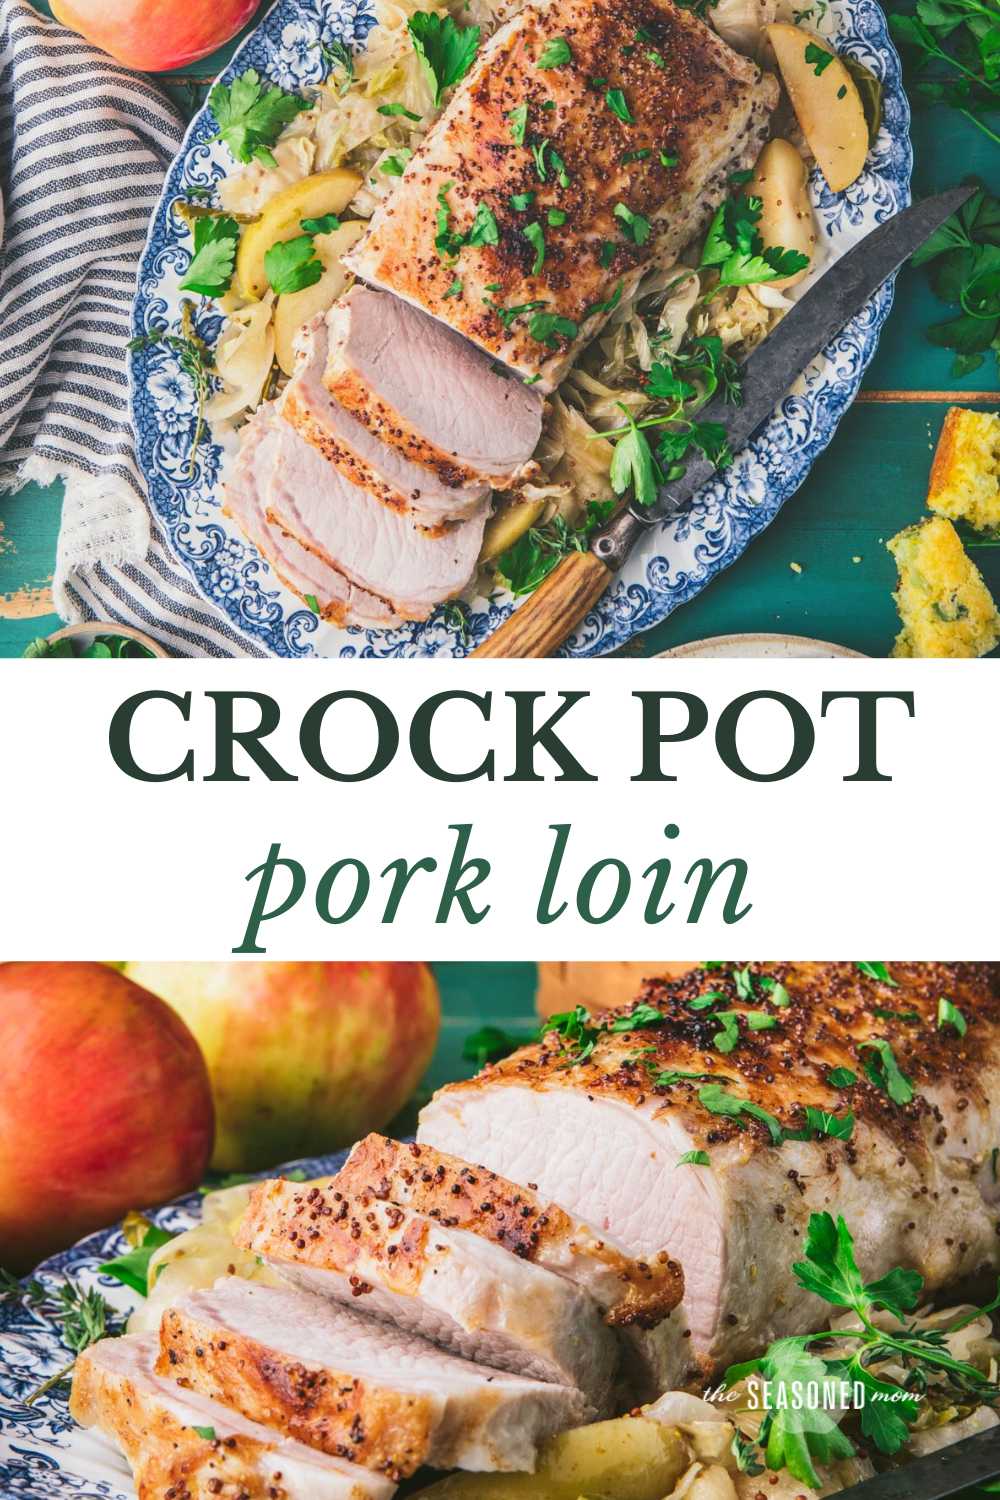 Crock Pot Pork Loin, Apples, and Cabbage - The Seasoned Mom